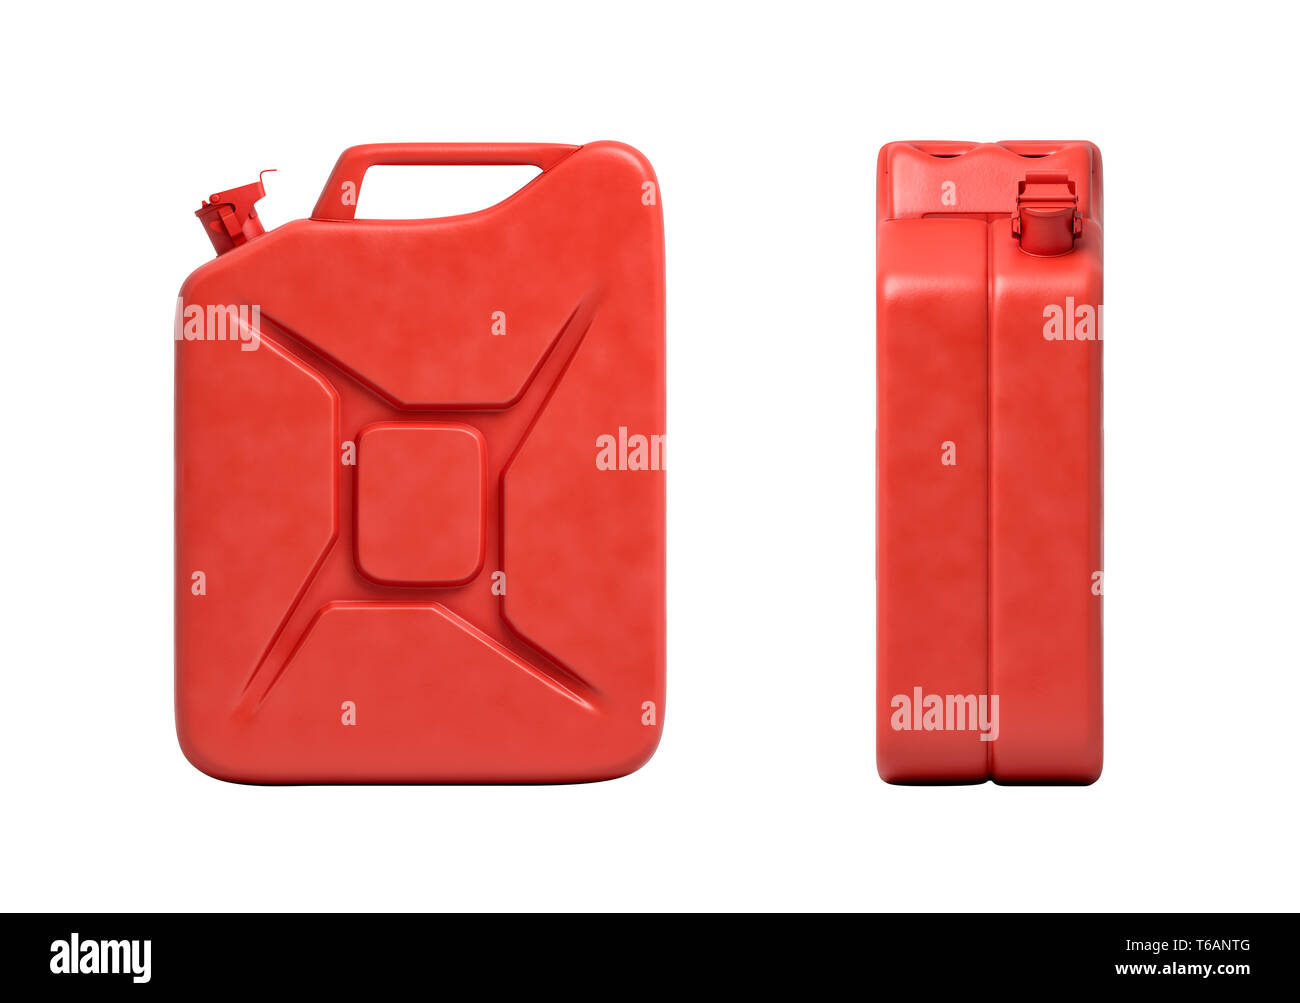 3d rendering of two red gas cans, front view and side view, isolated on white background. Stock Photo